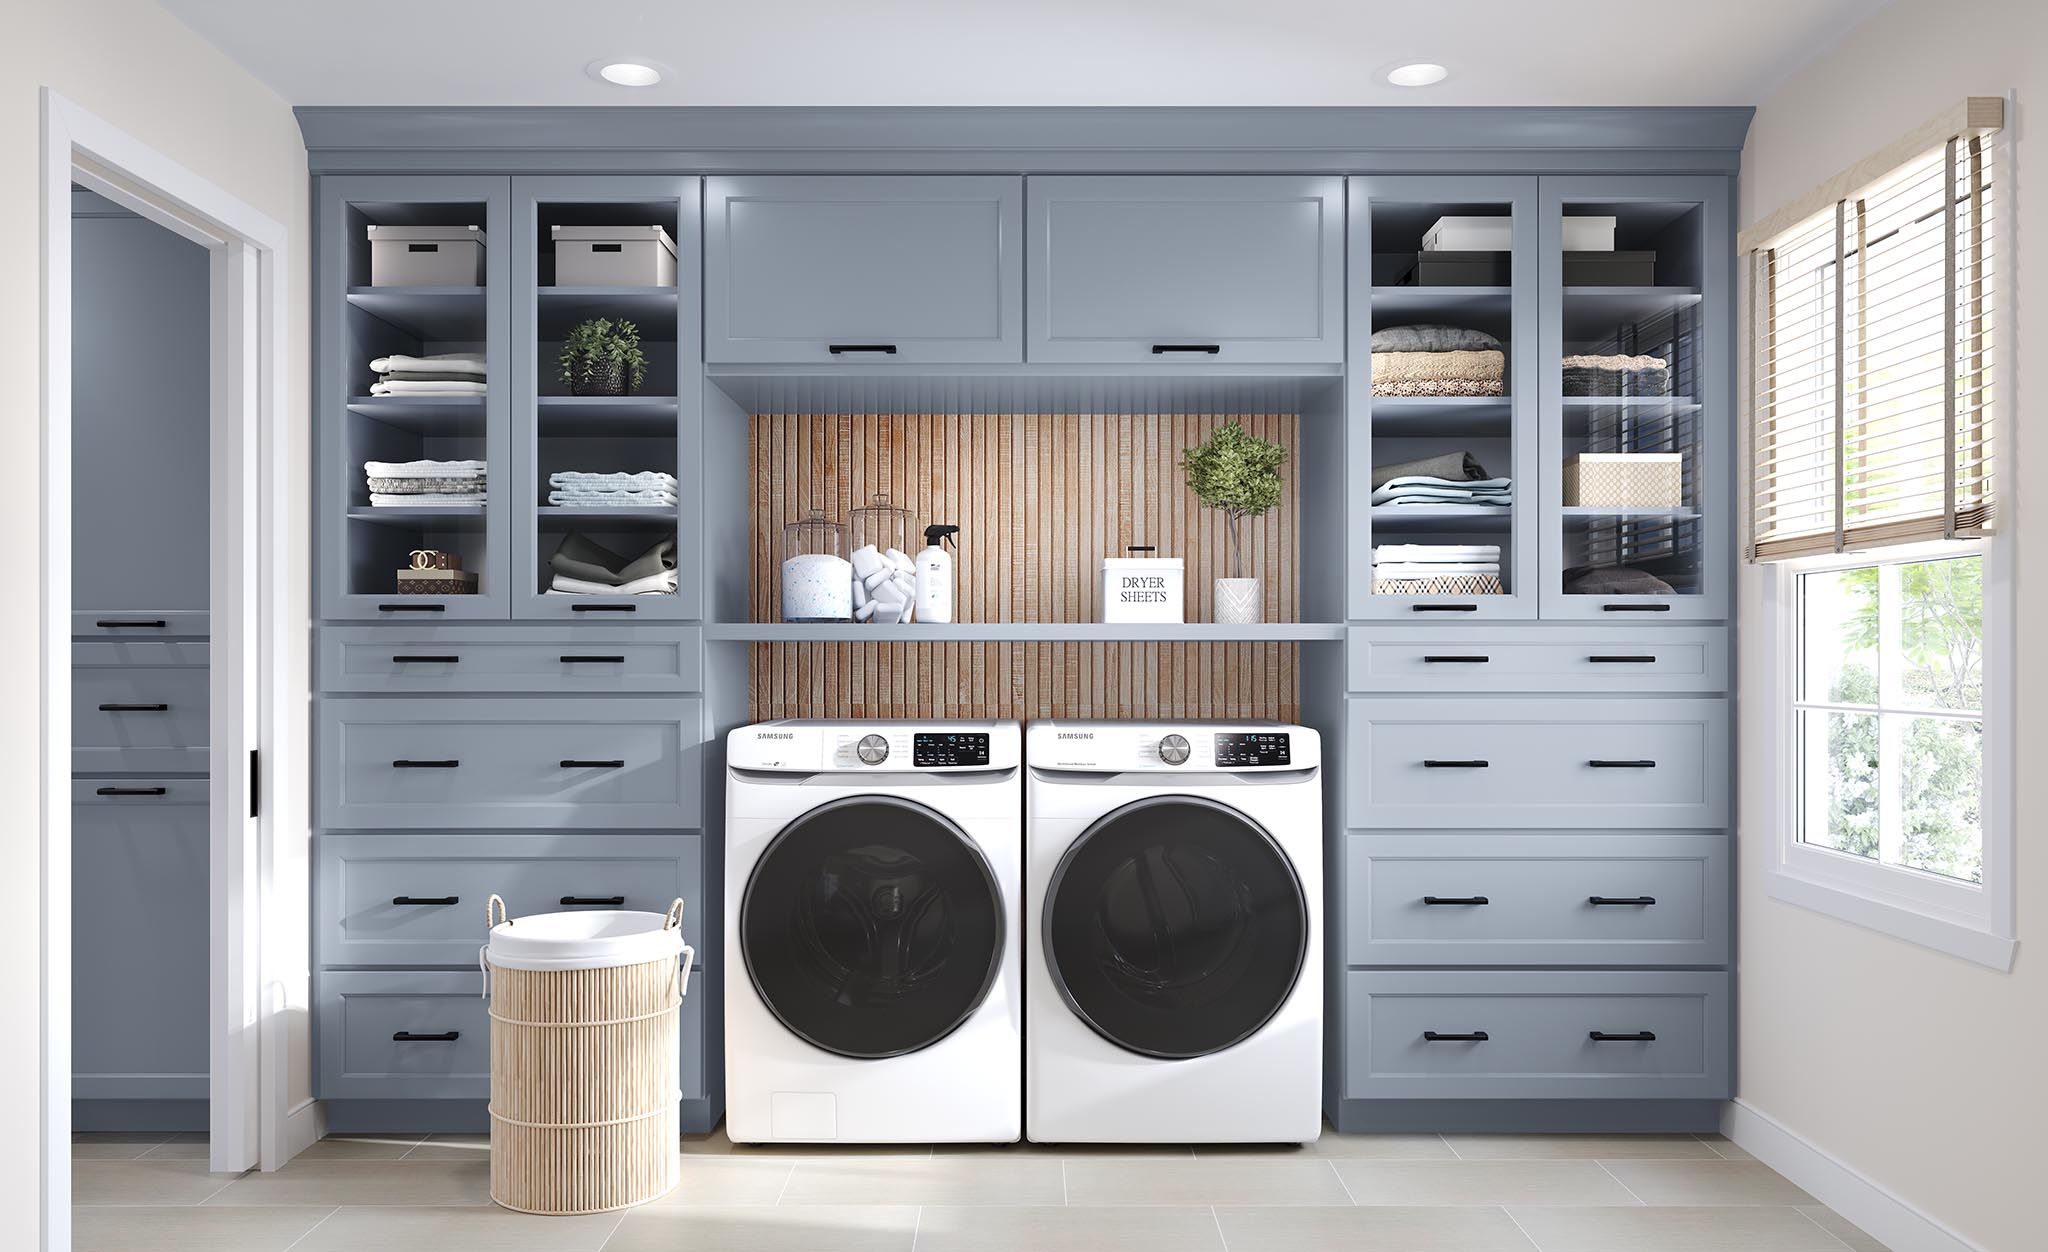 Utility room design ideas to make the most of your space